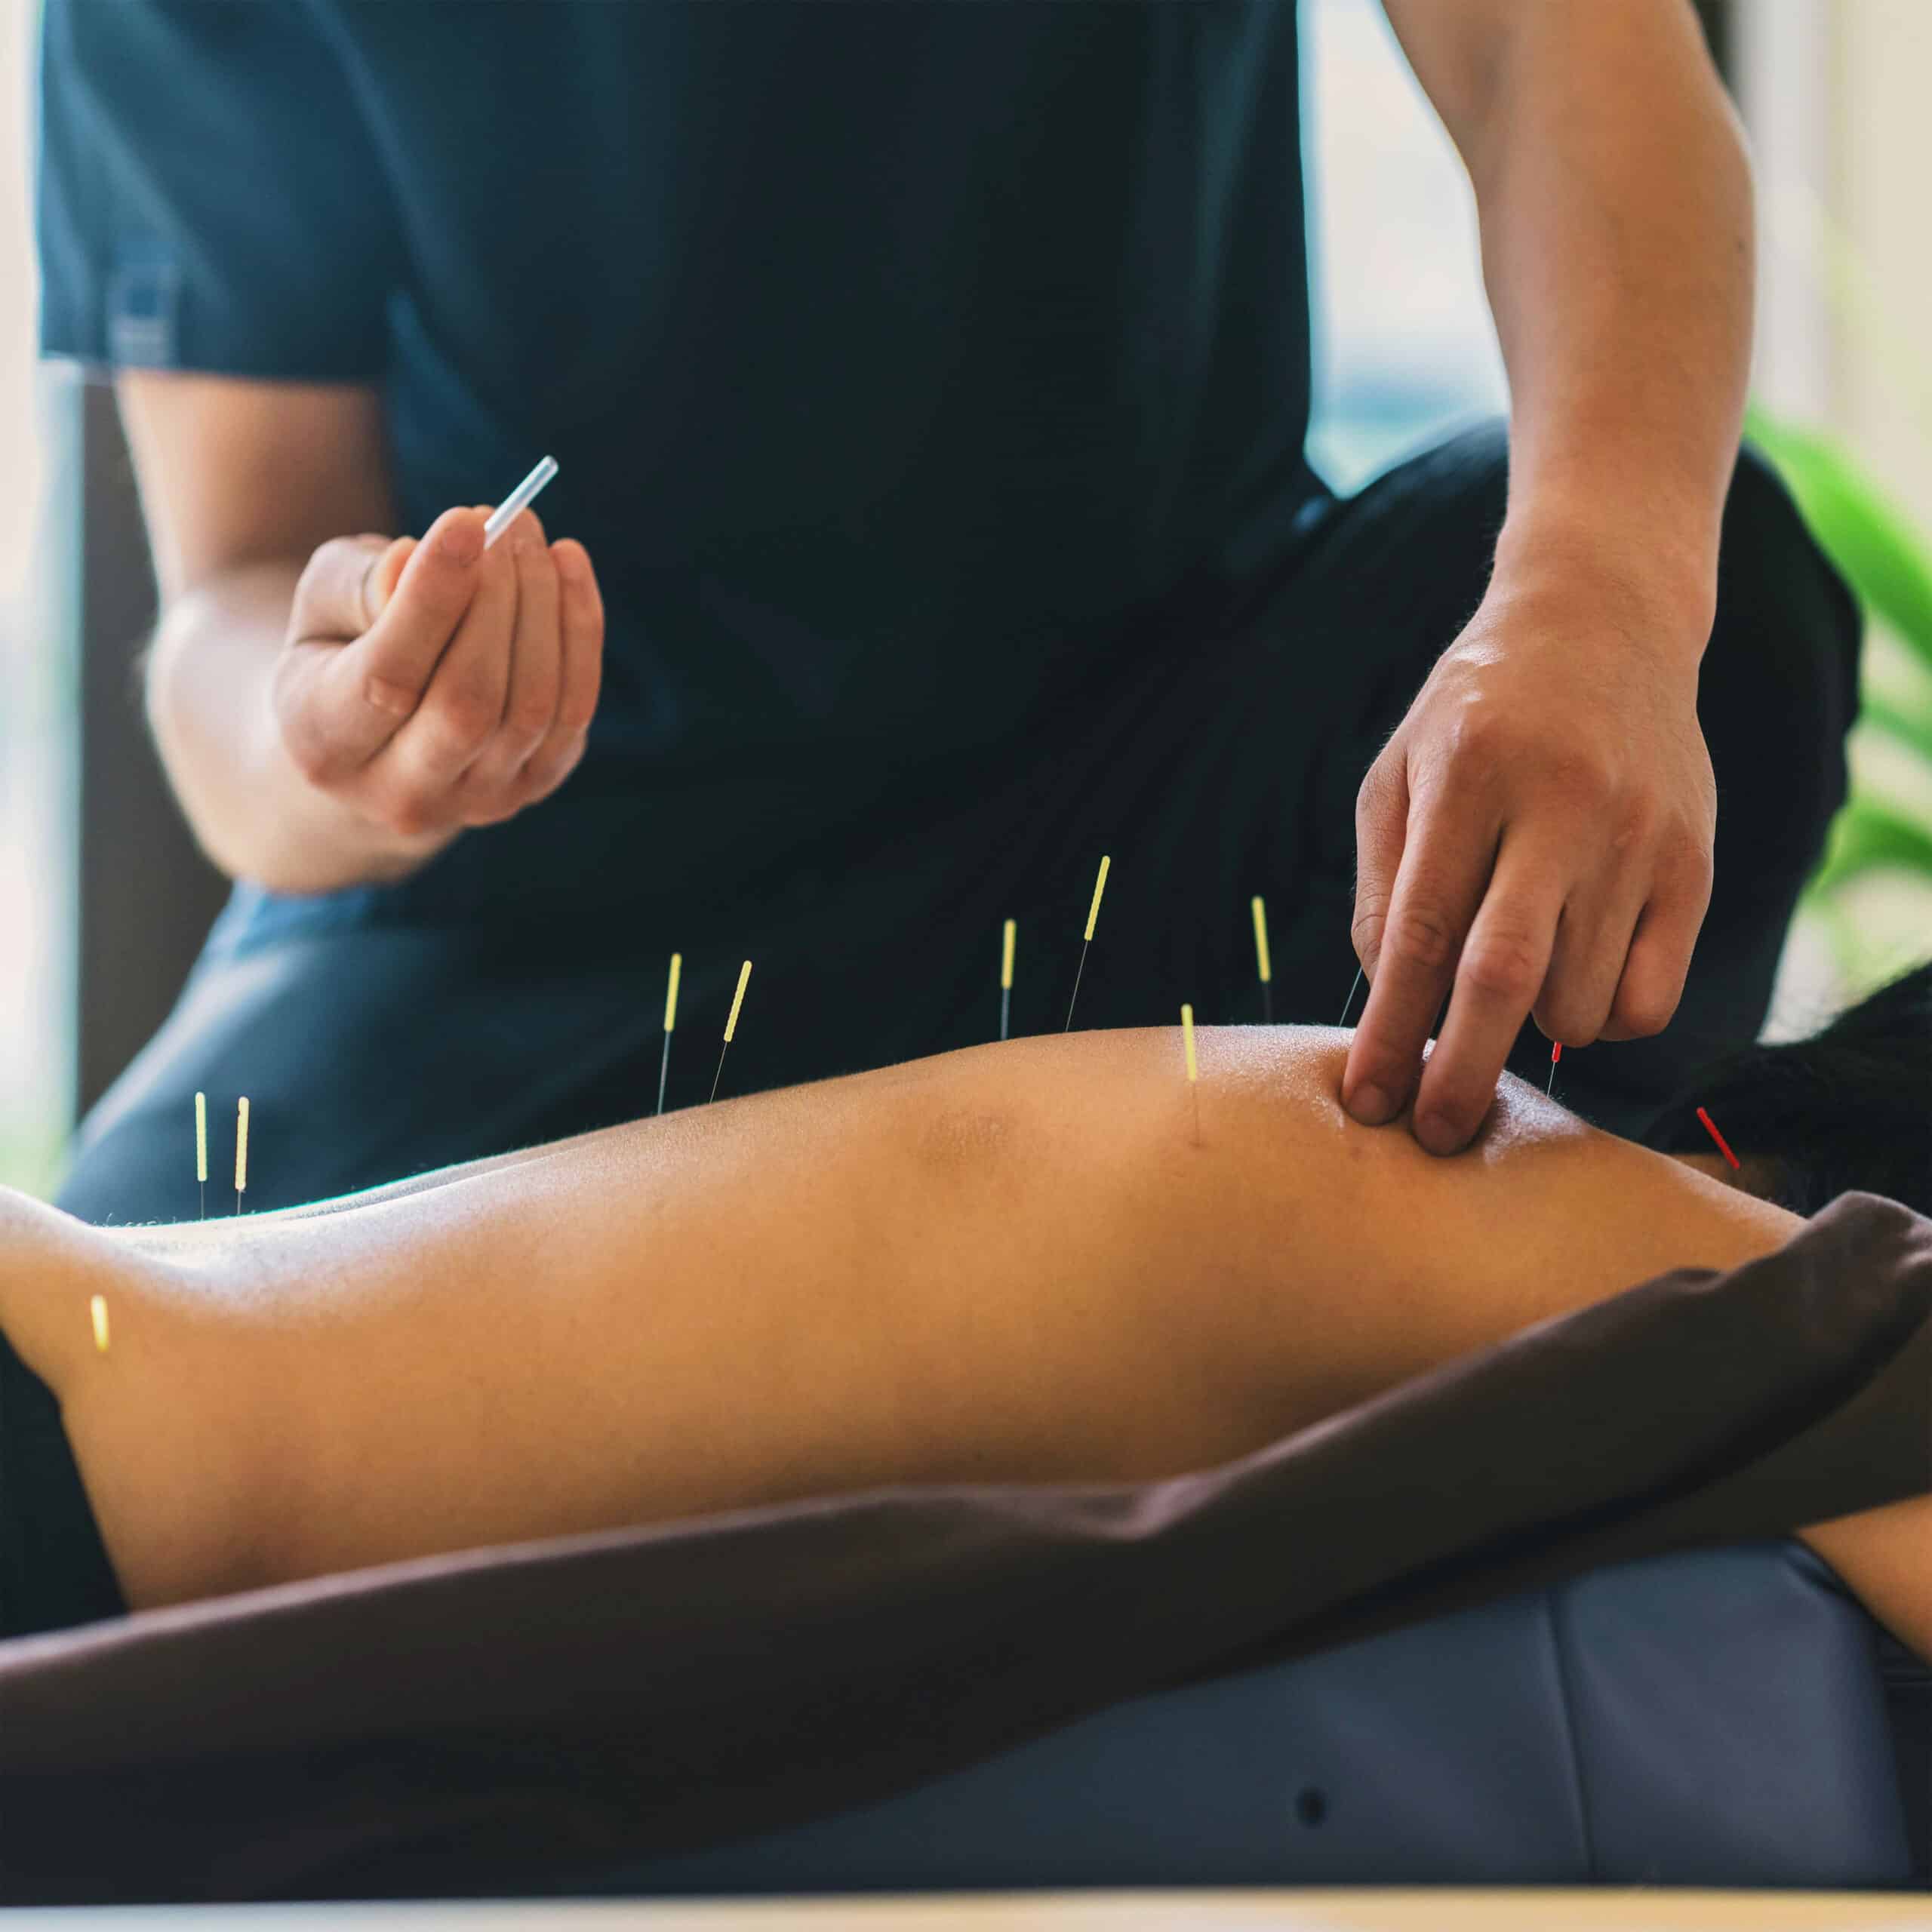 Dry Needling Near Me. A skilled doctor expertly performs dry needling on a patient's back, in a serene therapy room, aiming to relieve muscle tension and promote healing.